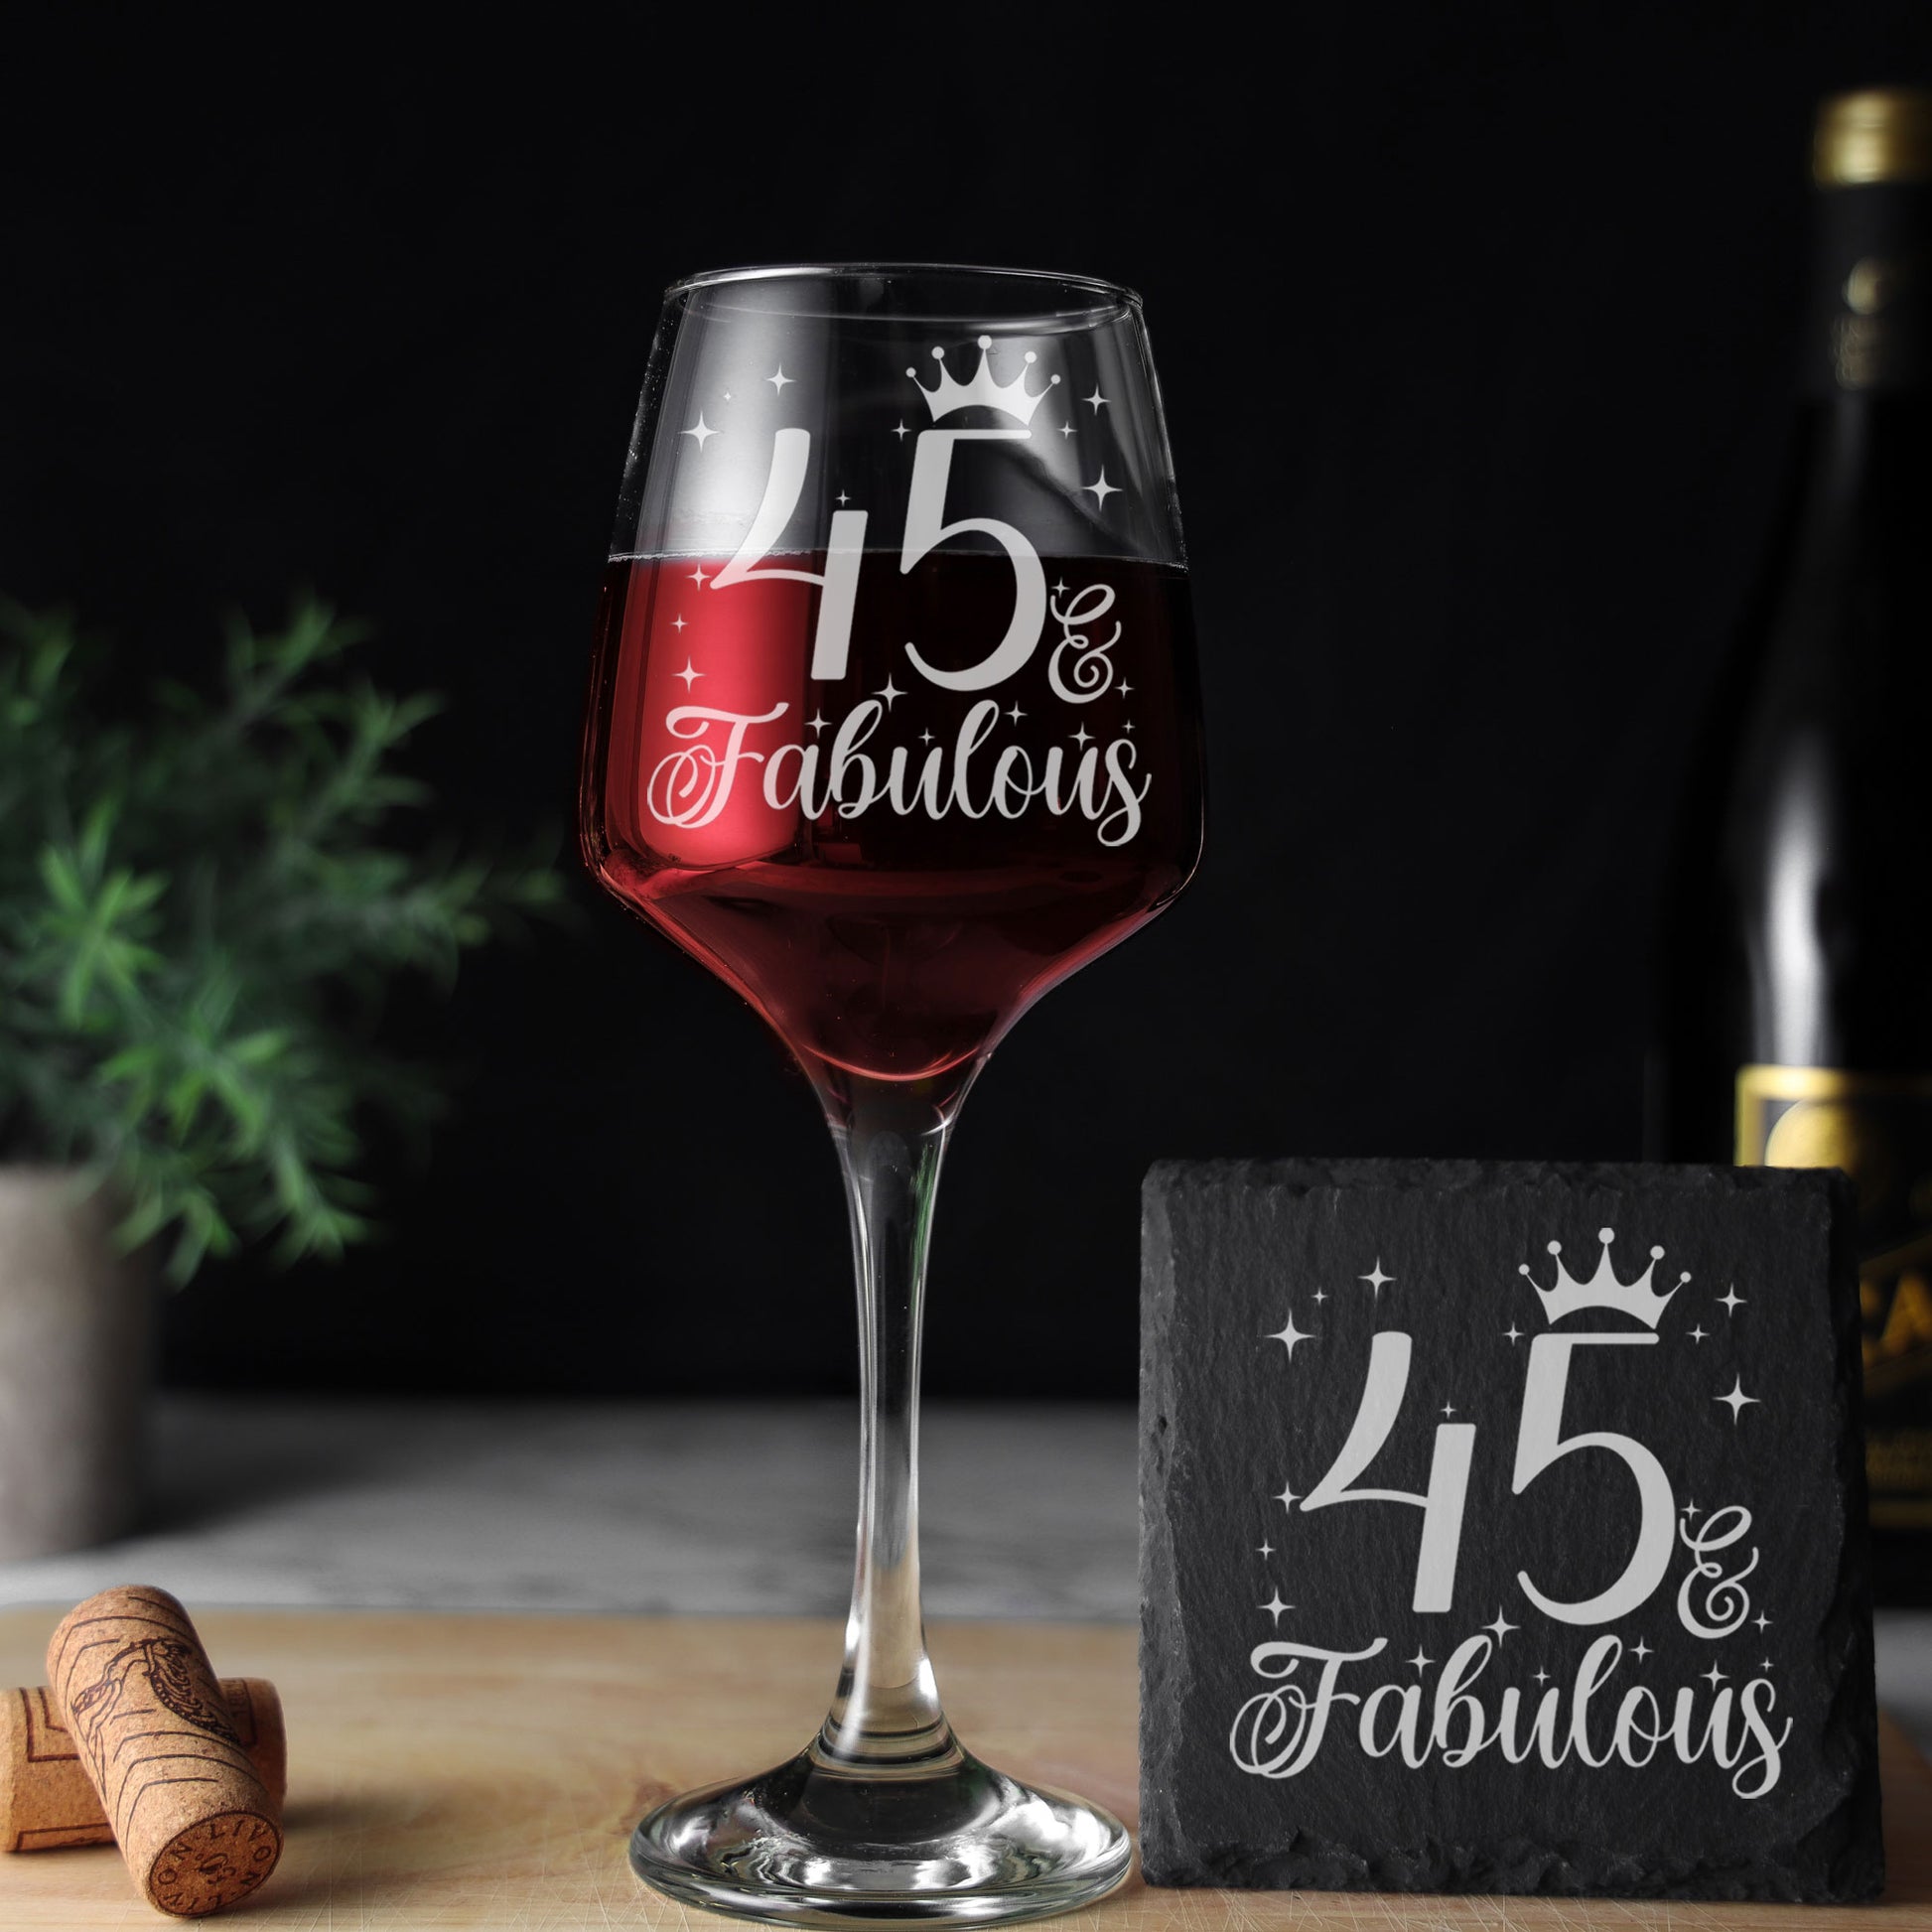 45 & Fabulous 45th Birthday Gift Engraved Wine Glass and/or Coaster Set  - Always Looking Good - Glass & Square Coaster  